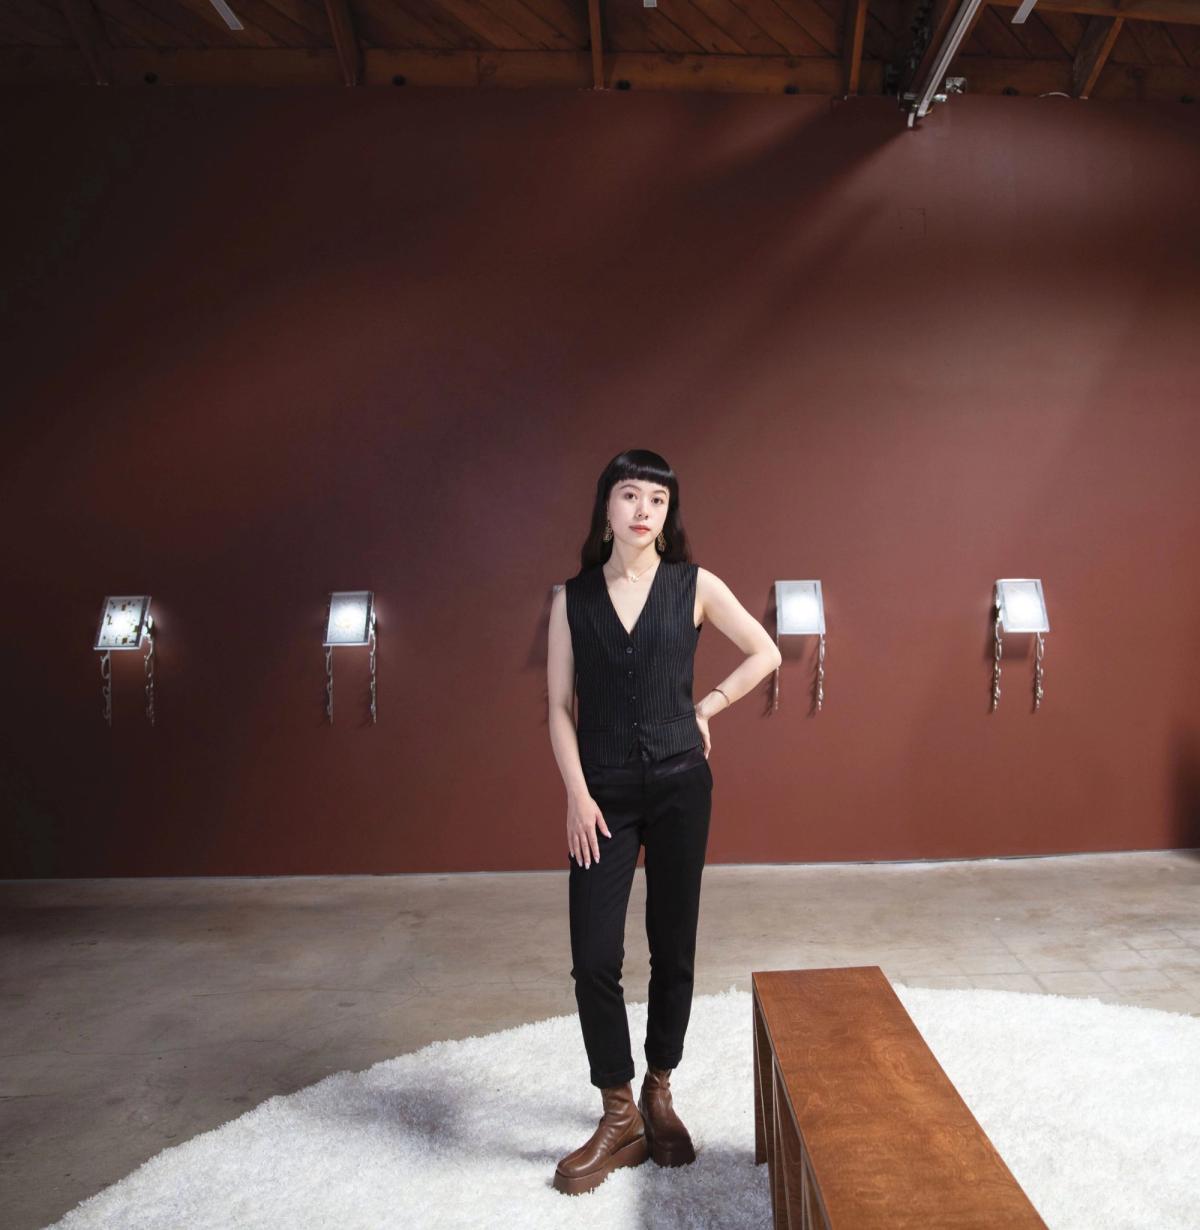 Emilia Yin says she has "always been drawn to Surrealism and works that reward a close study" Photo: Jiahao Peng; courtesy of Emilia Yin and Make Room, Los Angeles